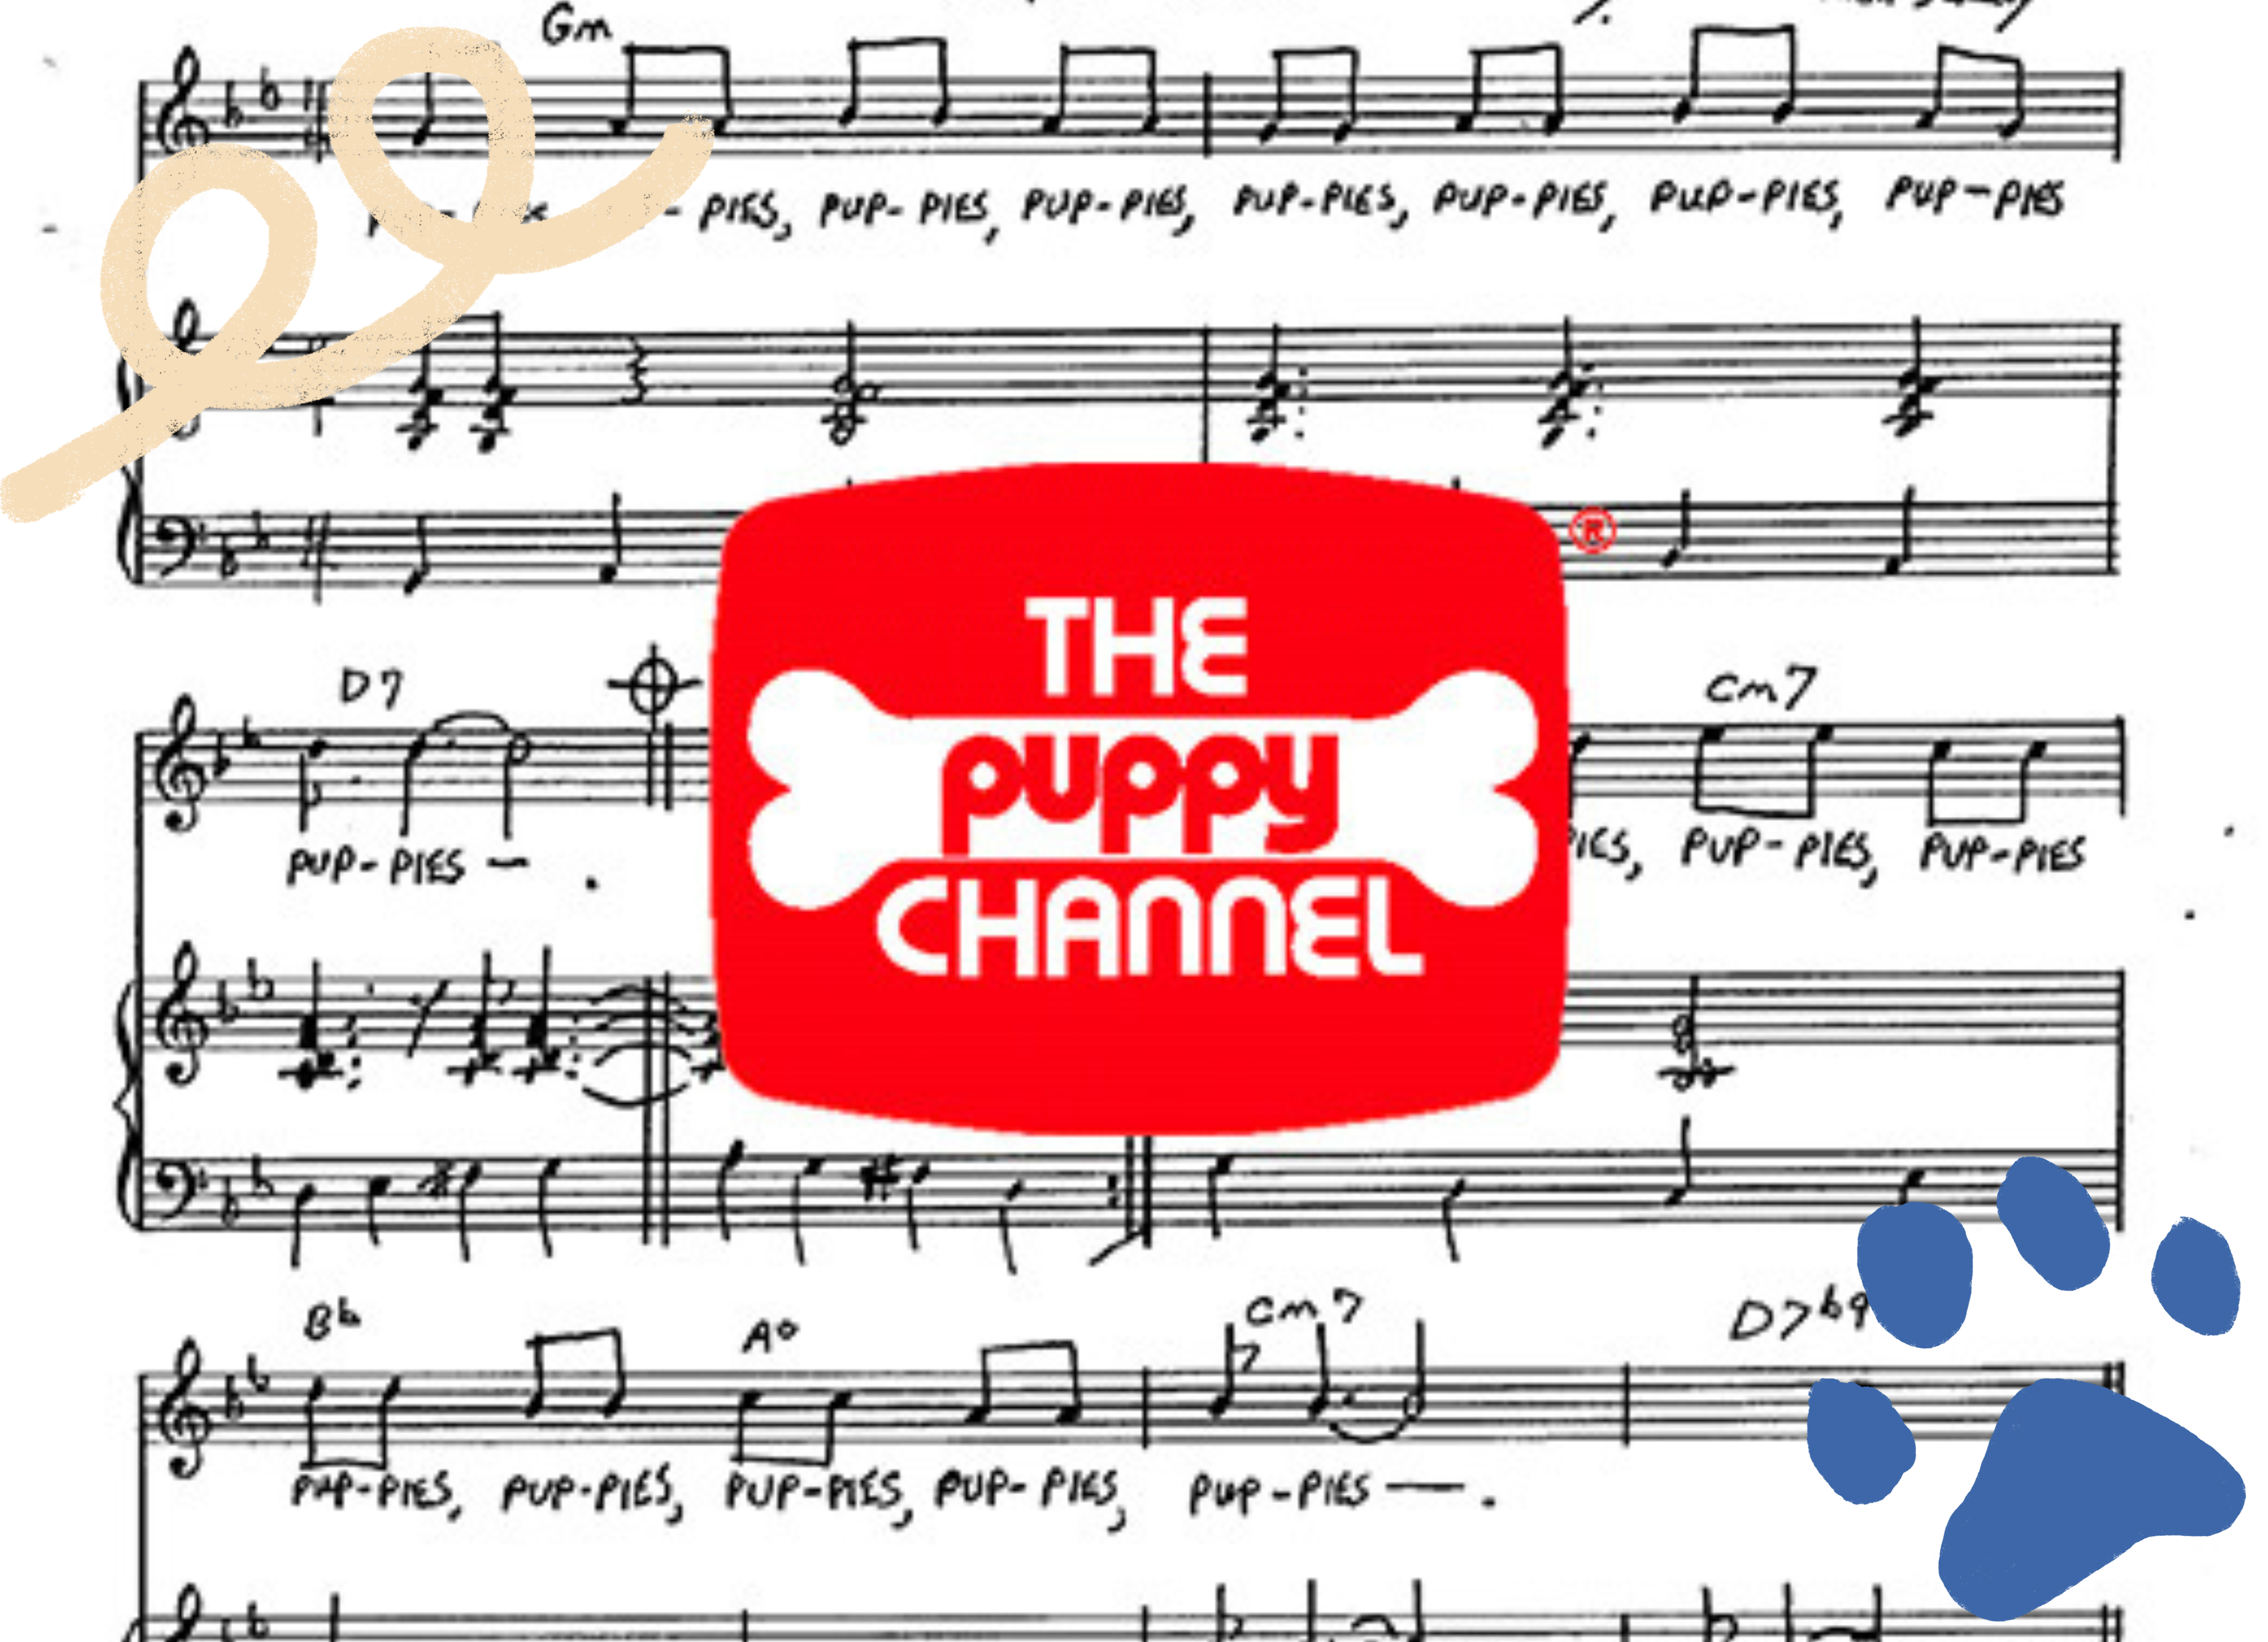 A Tribute to The Puppy Channel